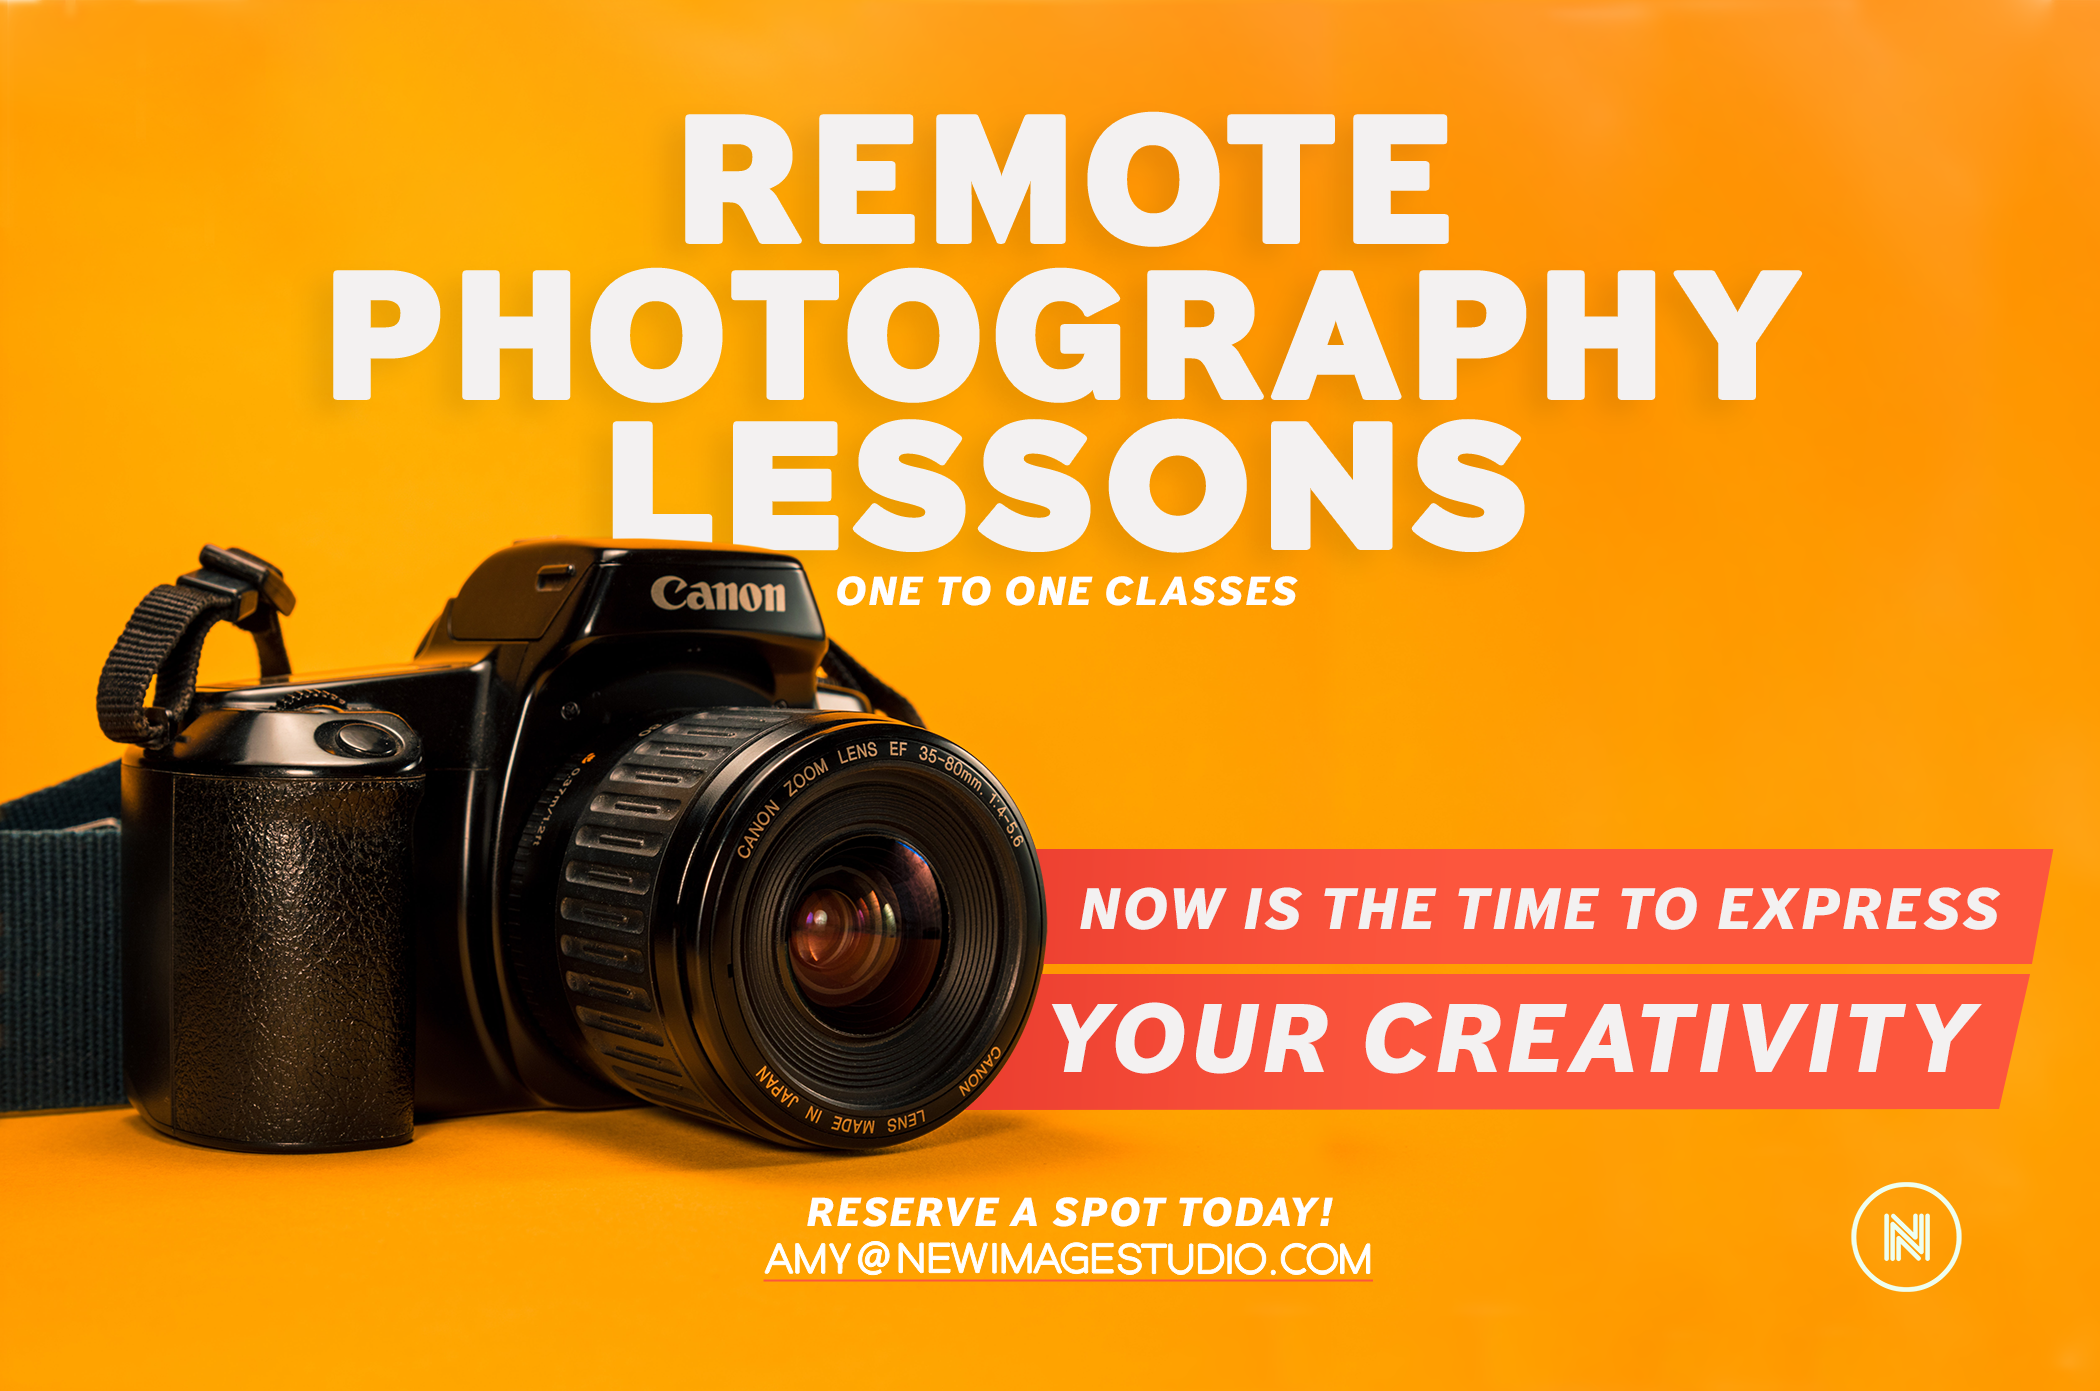 Remote Photography Lessons Are Here!